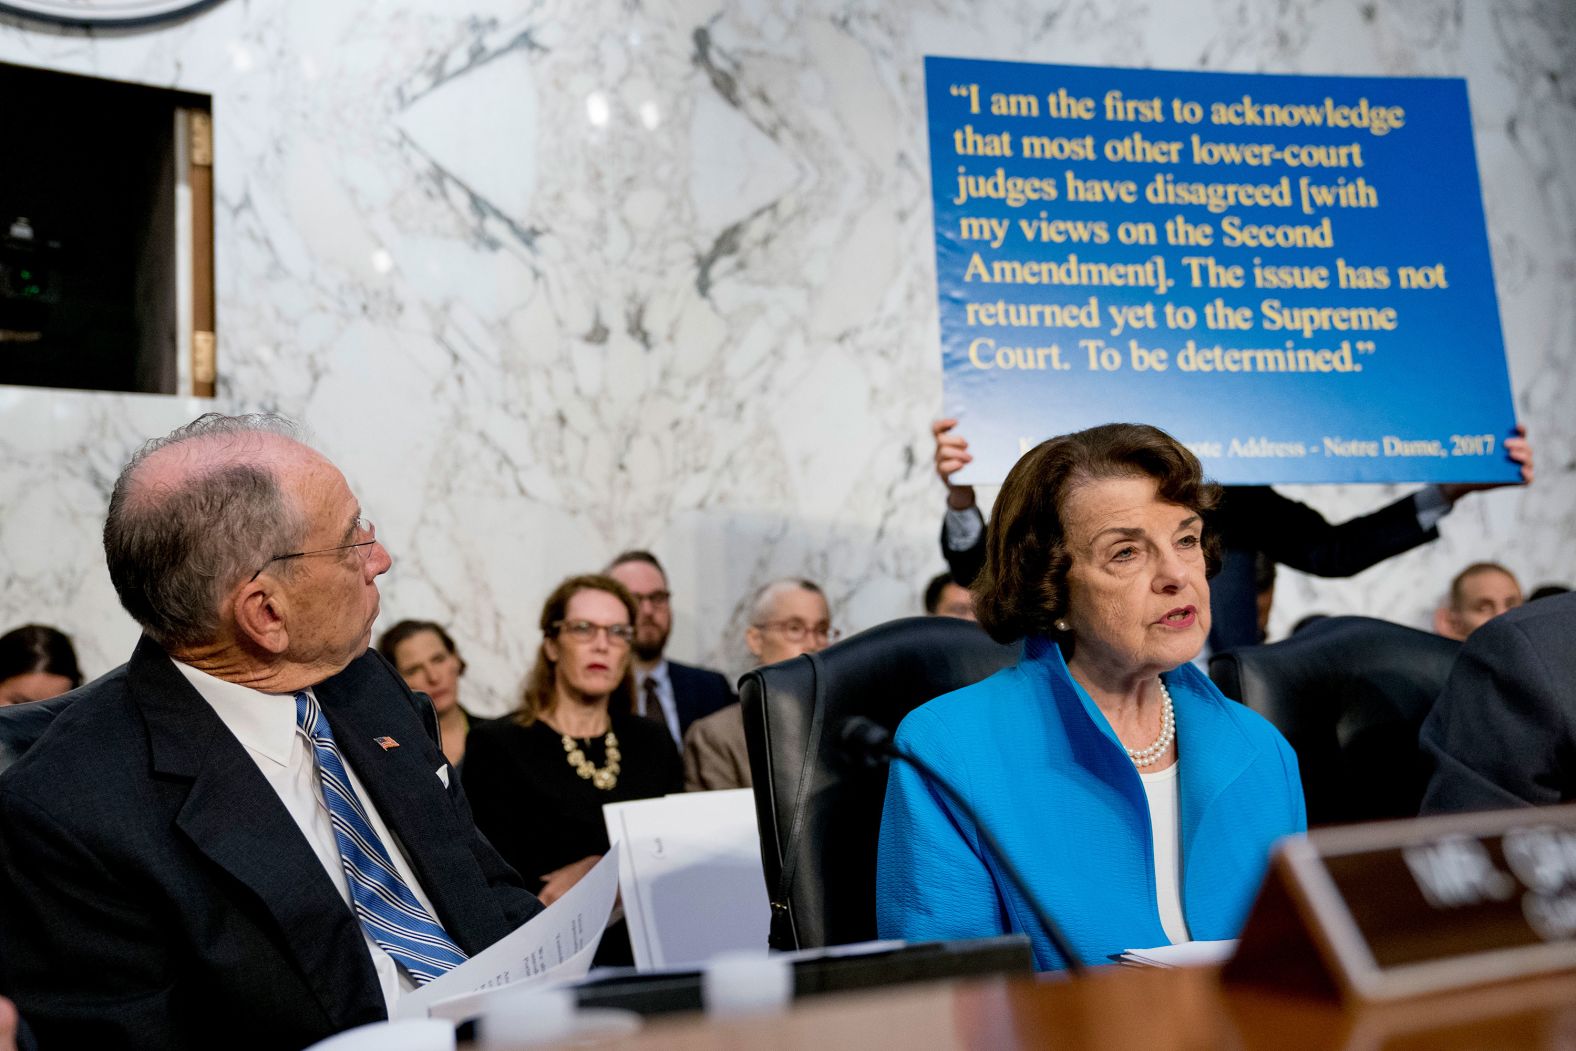 A poster on Wednesday shows a quote of Kavanaugh's from 2017. Sen. Dianne Feinstein, front right, <a href="https://www.cnn.com/politics/live-news/kavanaugh-hearing-dle/h_71a89f195edbb405ce3fc4f2d93178ef" target="_blank">was questioning Kavanaugh's opinion on assault weapons,</a> specifically what he's said in the past about how "common use" dictates the rights of Americans to own and continue to use them. Kavanaugh said he follows Supreme Court precedents on the issue specifically as they relate to the Second Amendment, though he said that doesn't mean "that there is no gun regulation permissible."